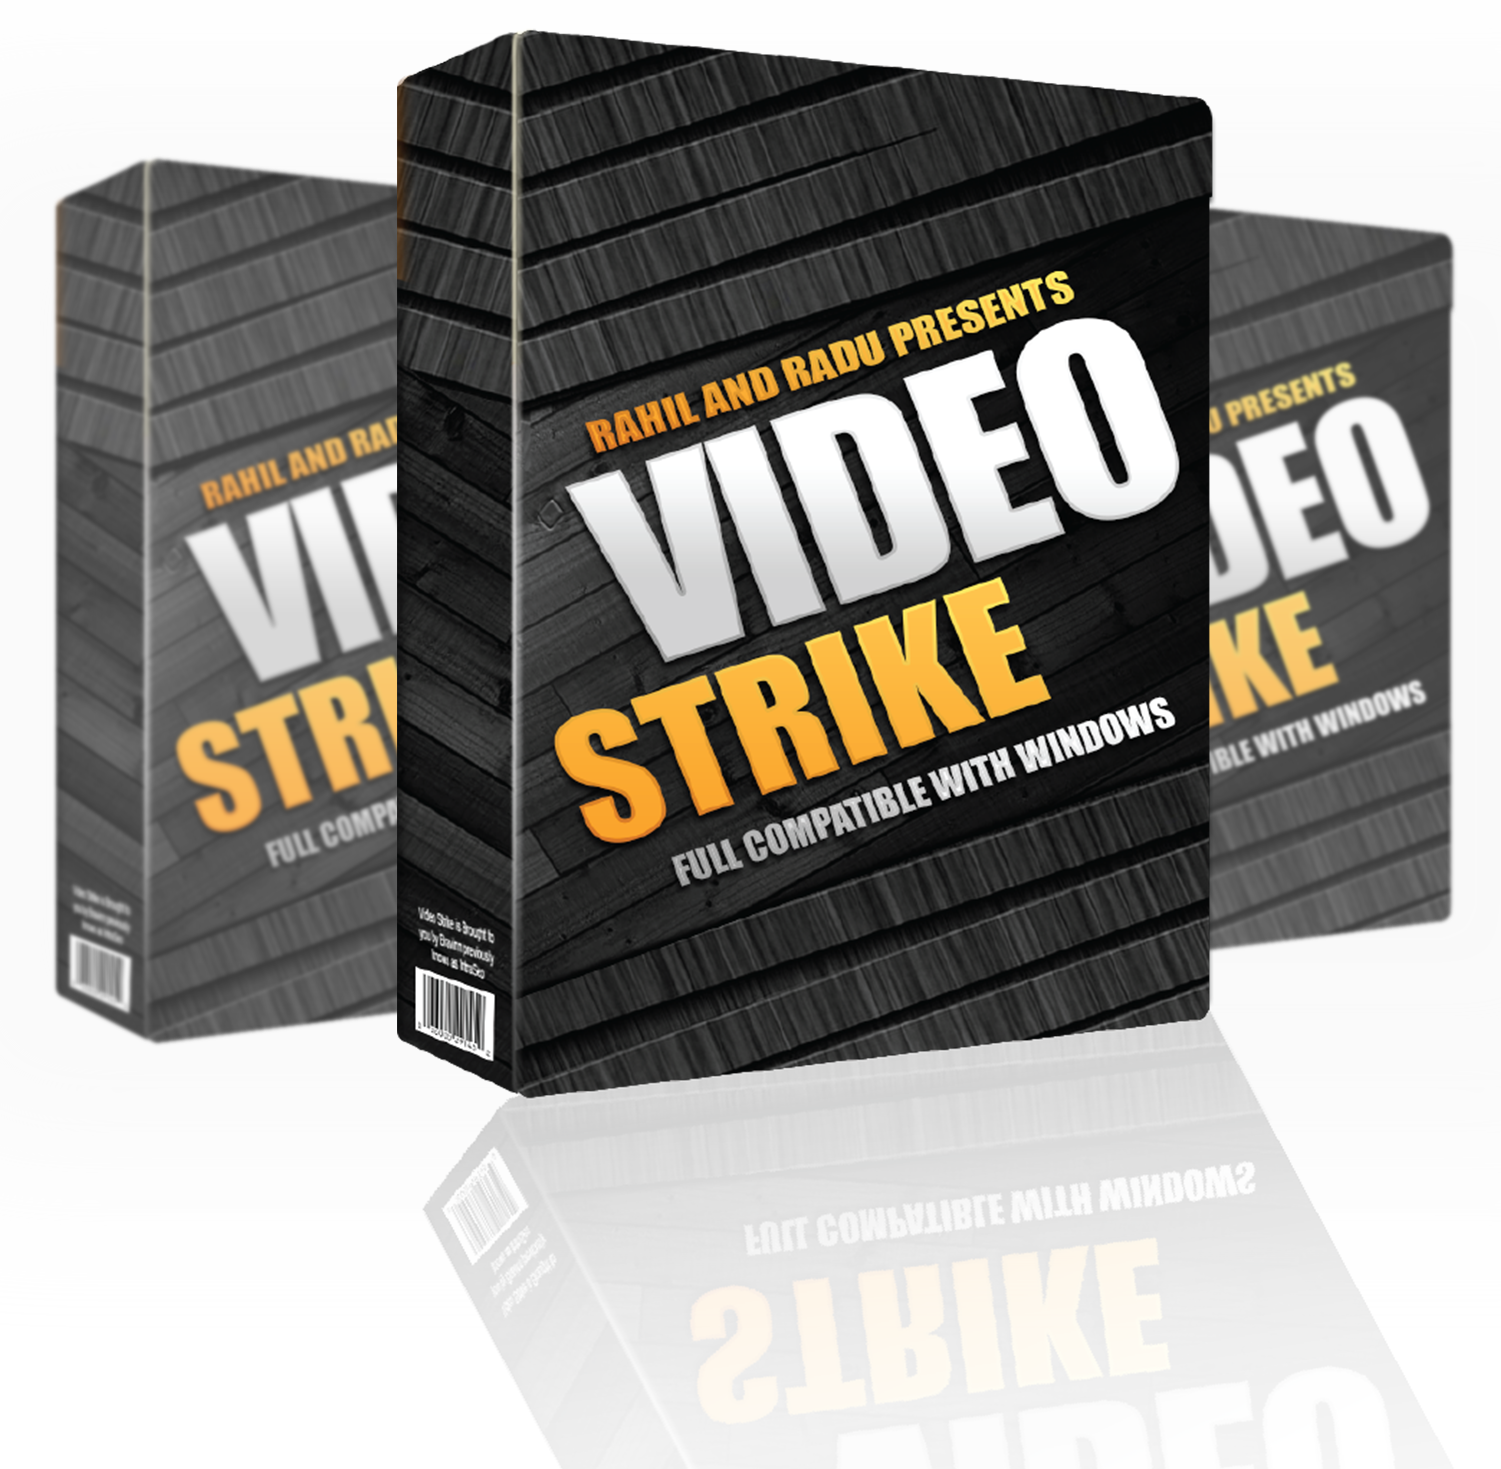 VIdeoStrikeJVFinal3 1 1 New Drag And Drop Site Creator With Built-In Hosting 'N' Traffic Lets You CreateSell Anything - Local Sites, Clickbank Sites, Software and More! #WORKFROMHOME